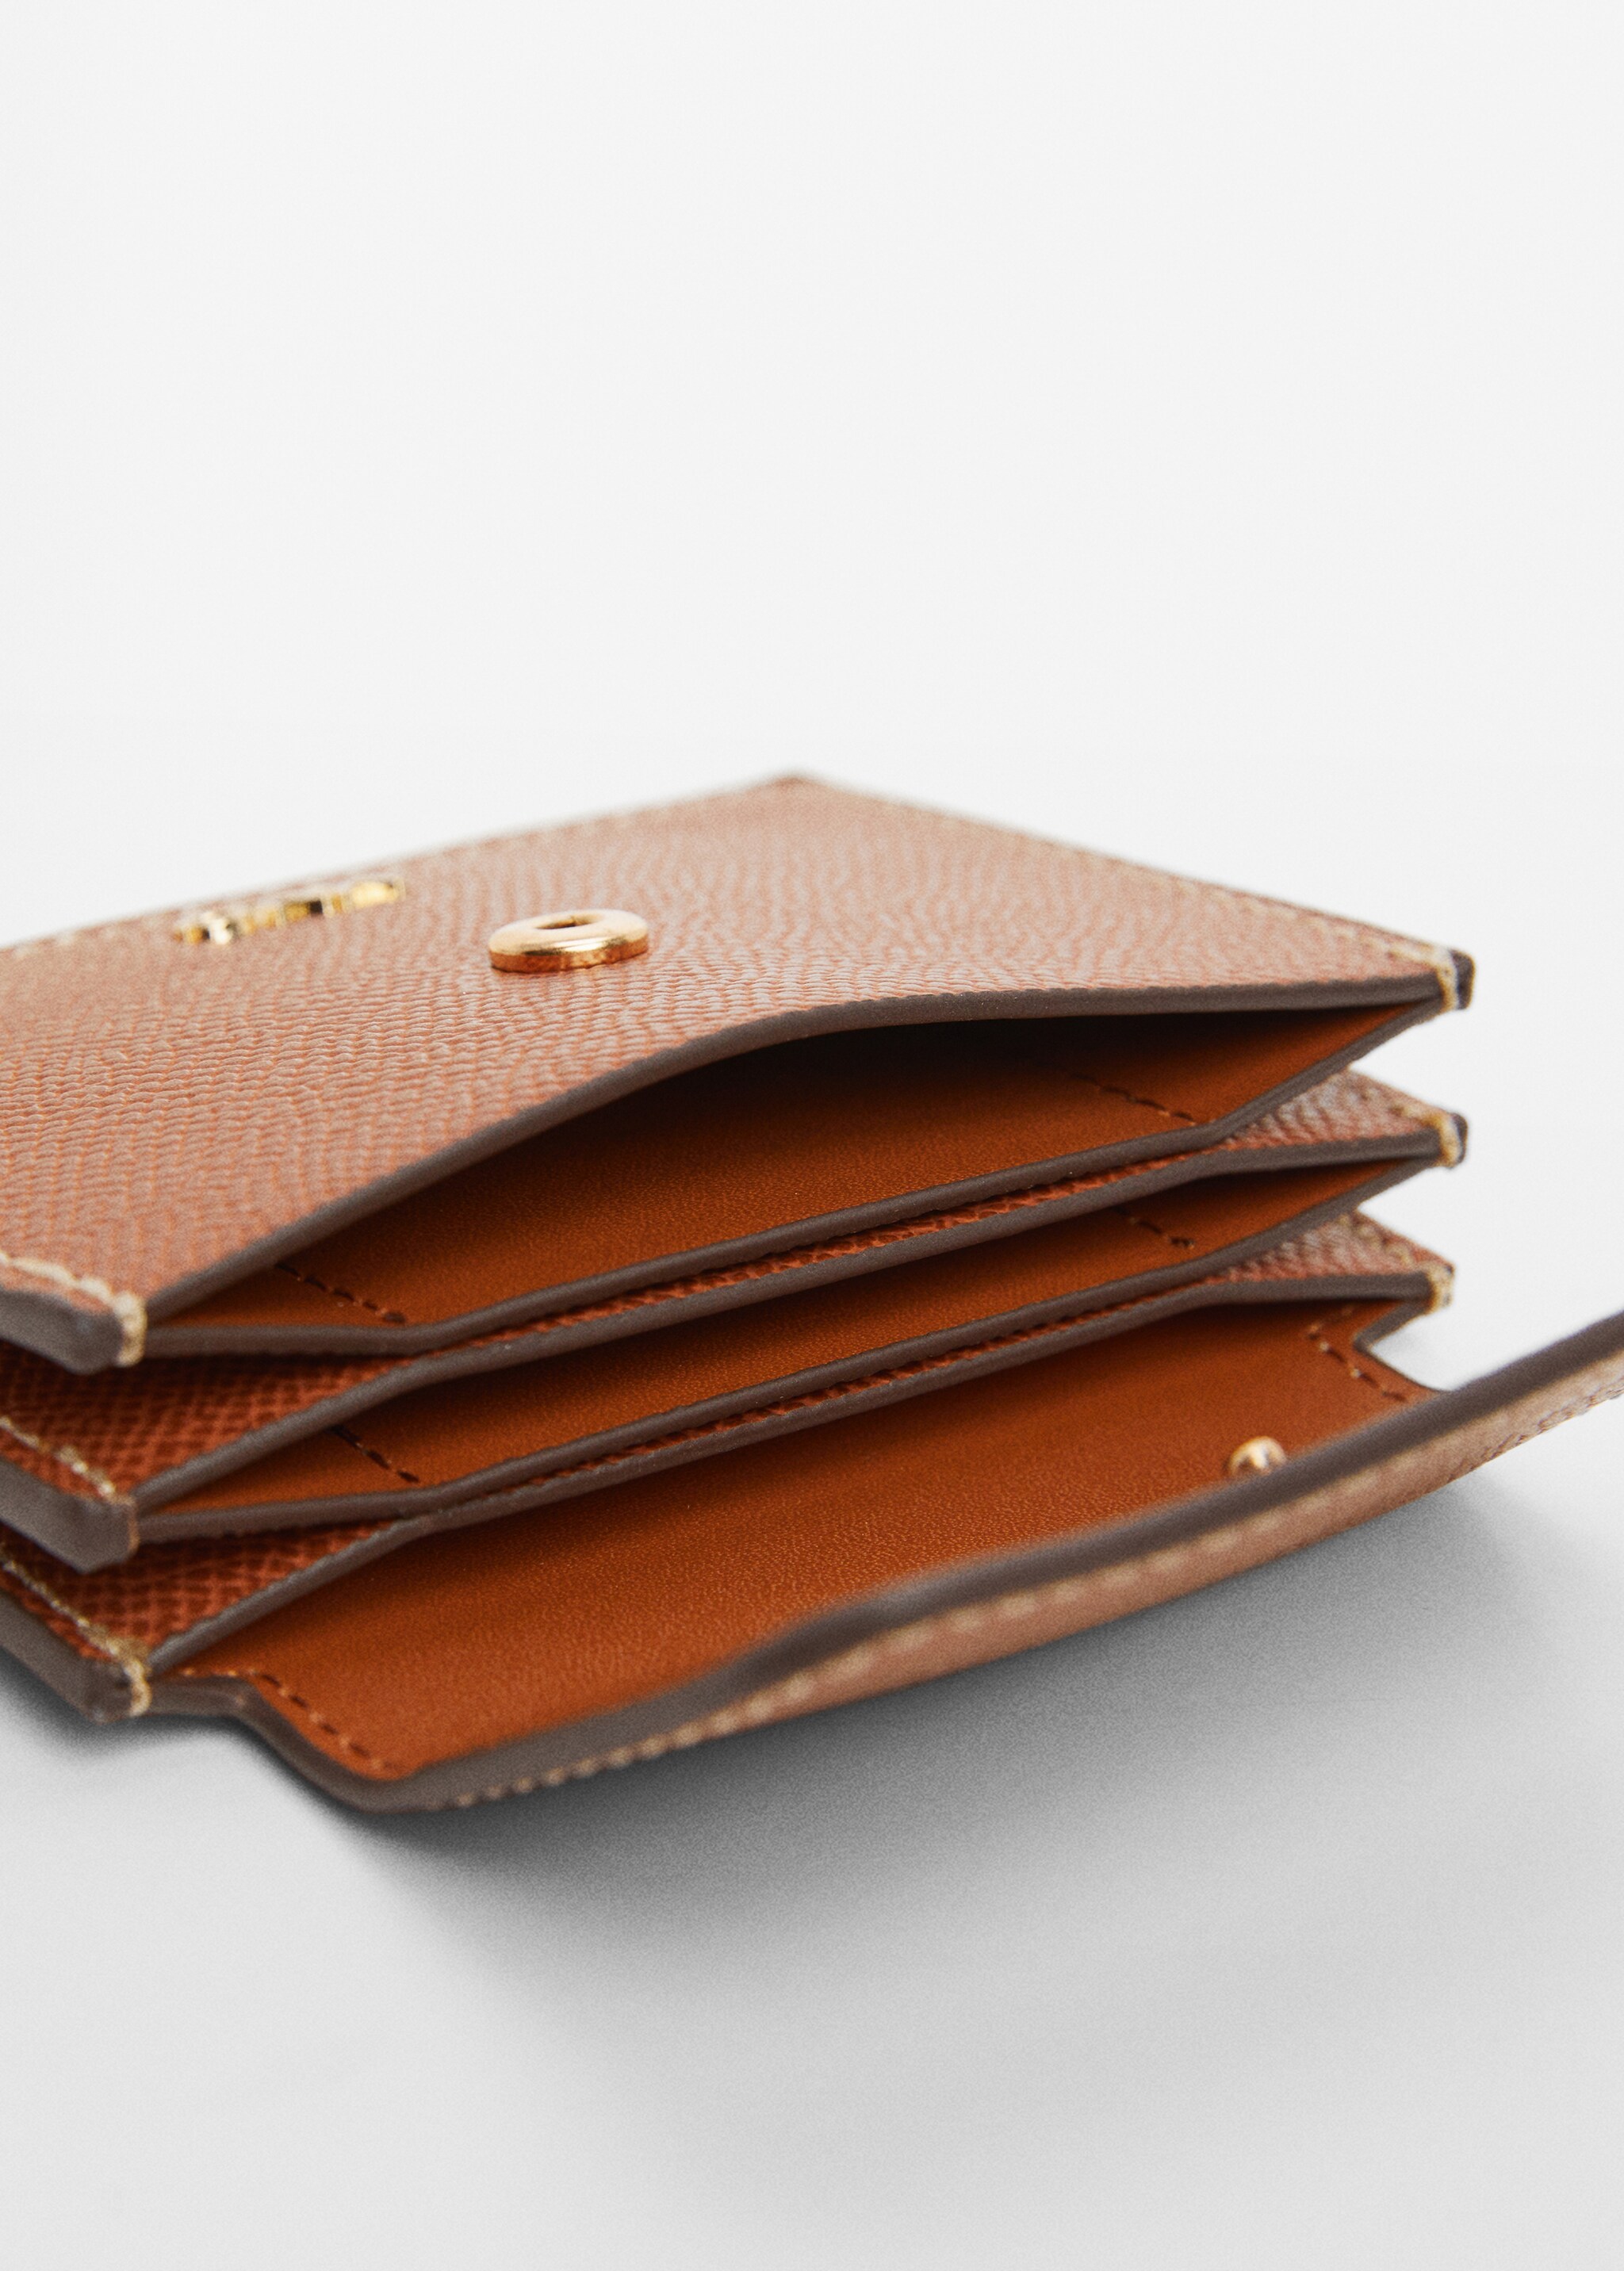 Faux leather cardholder - Details of the article 1